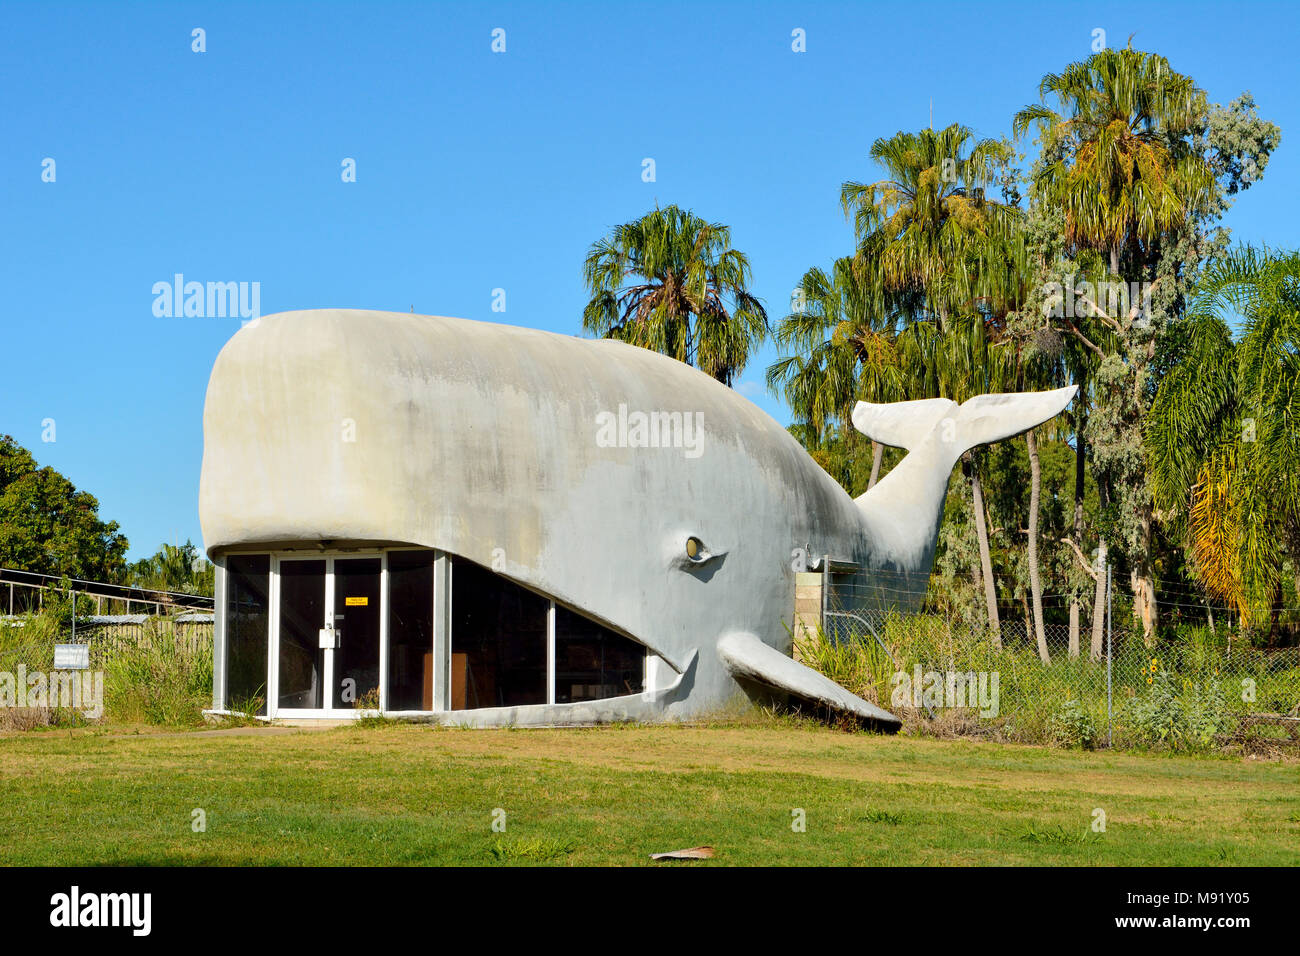 Kinka Beach, Queensland, Australia - December 27, 2017. Large Whale building, designed by Kevin Logan and housing private facilities in Kinka Beach, Q Stock Photo